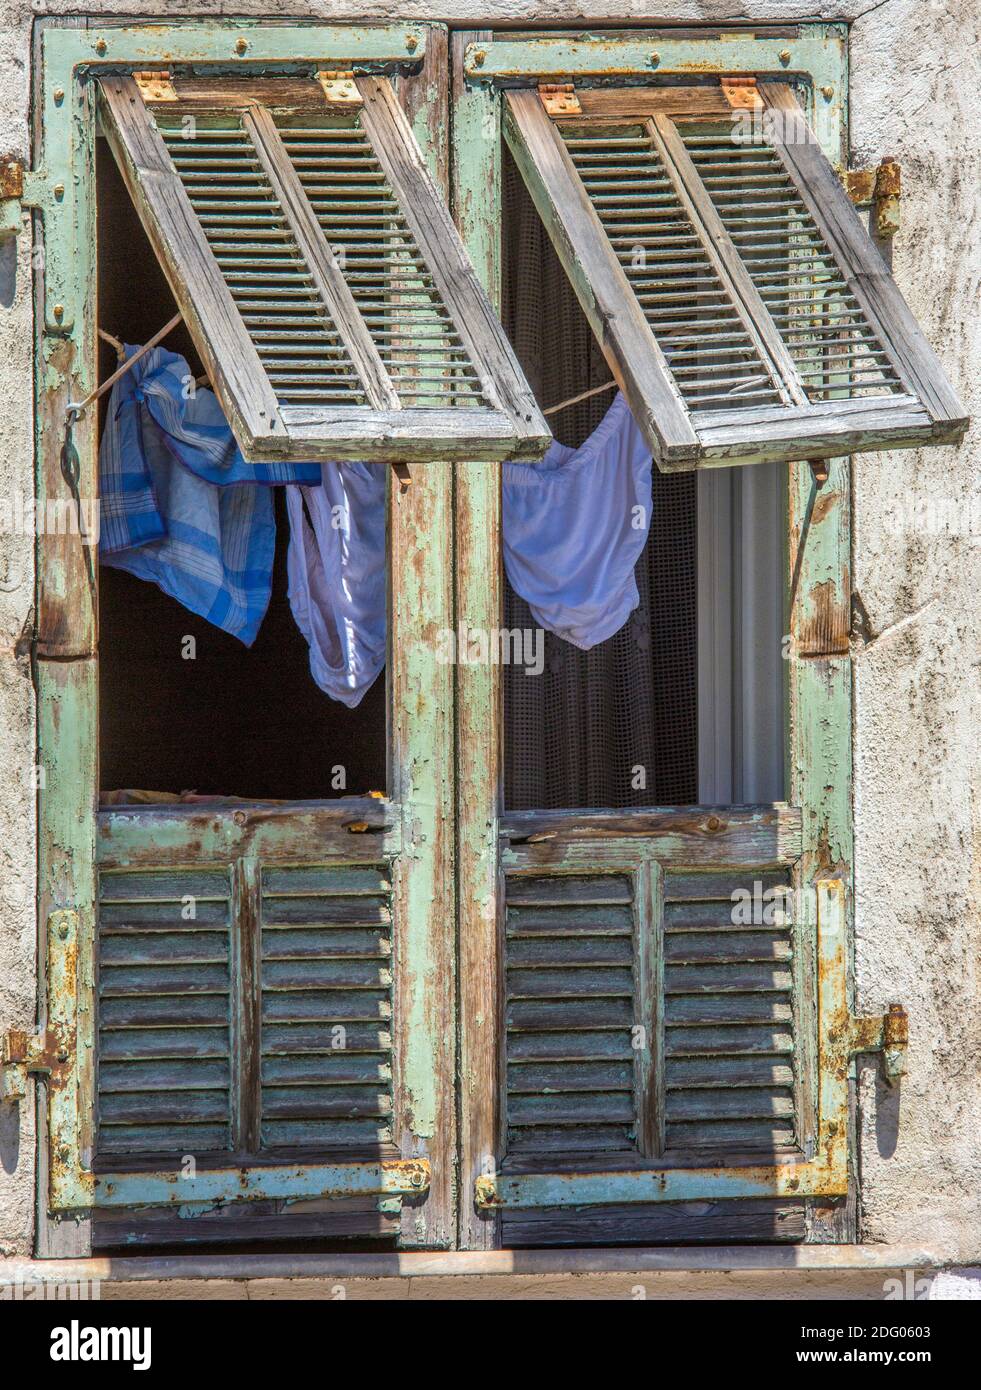 Urban Decay - Architectural detail on a building in the city of Nice in the South of France. Stock Photo